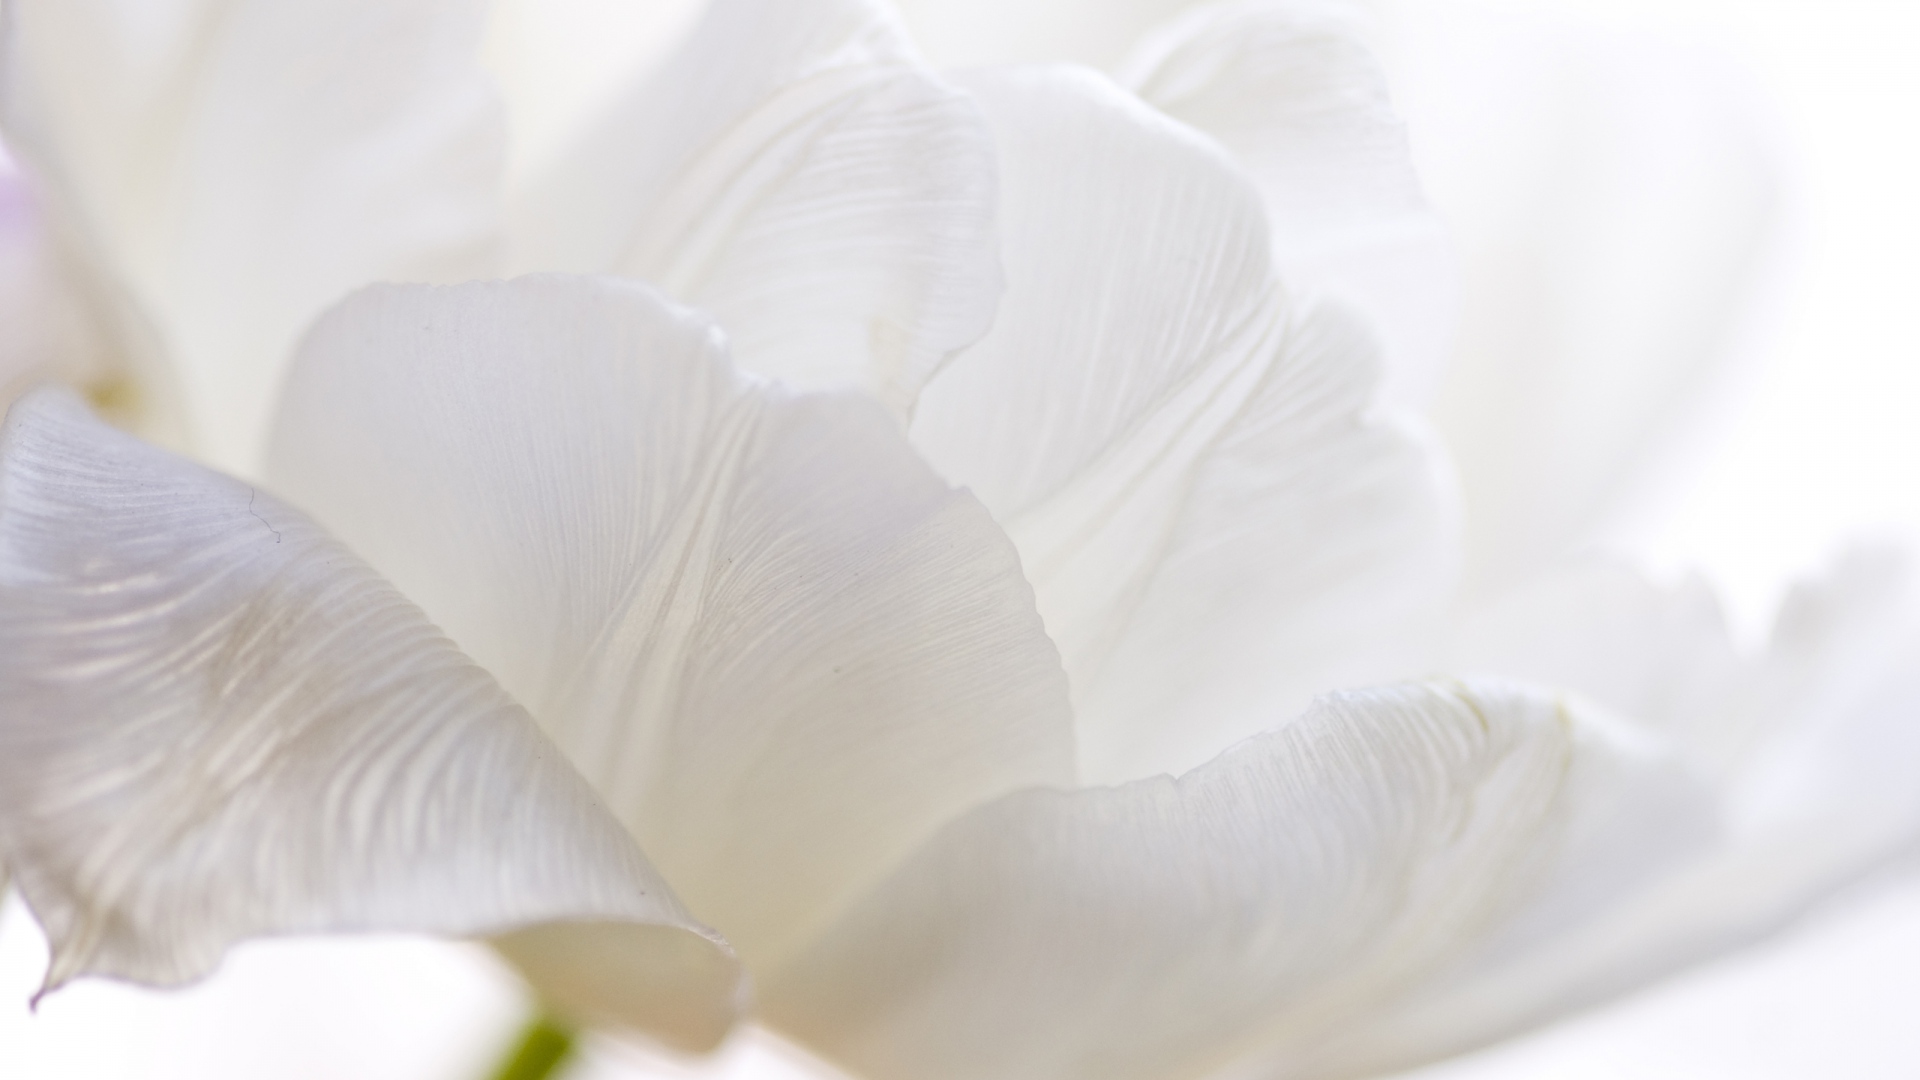 bloosms of white tulips beautiful wallpaper free download pics